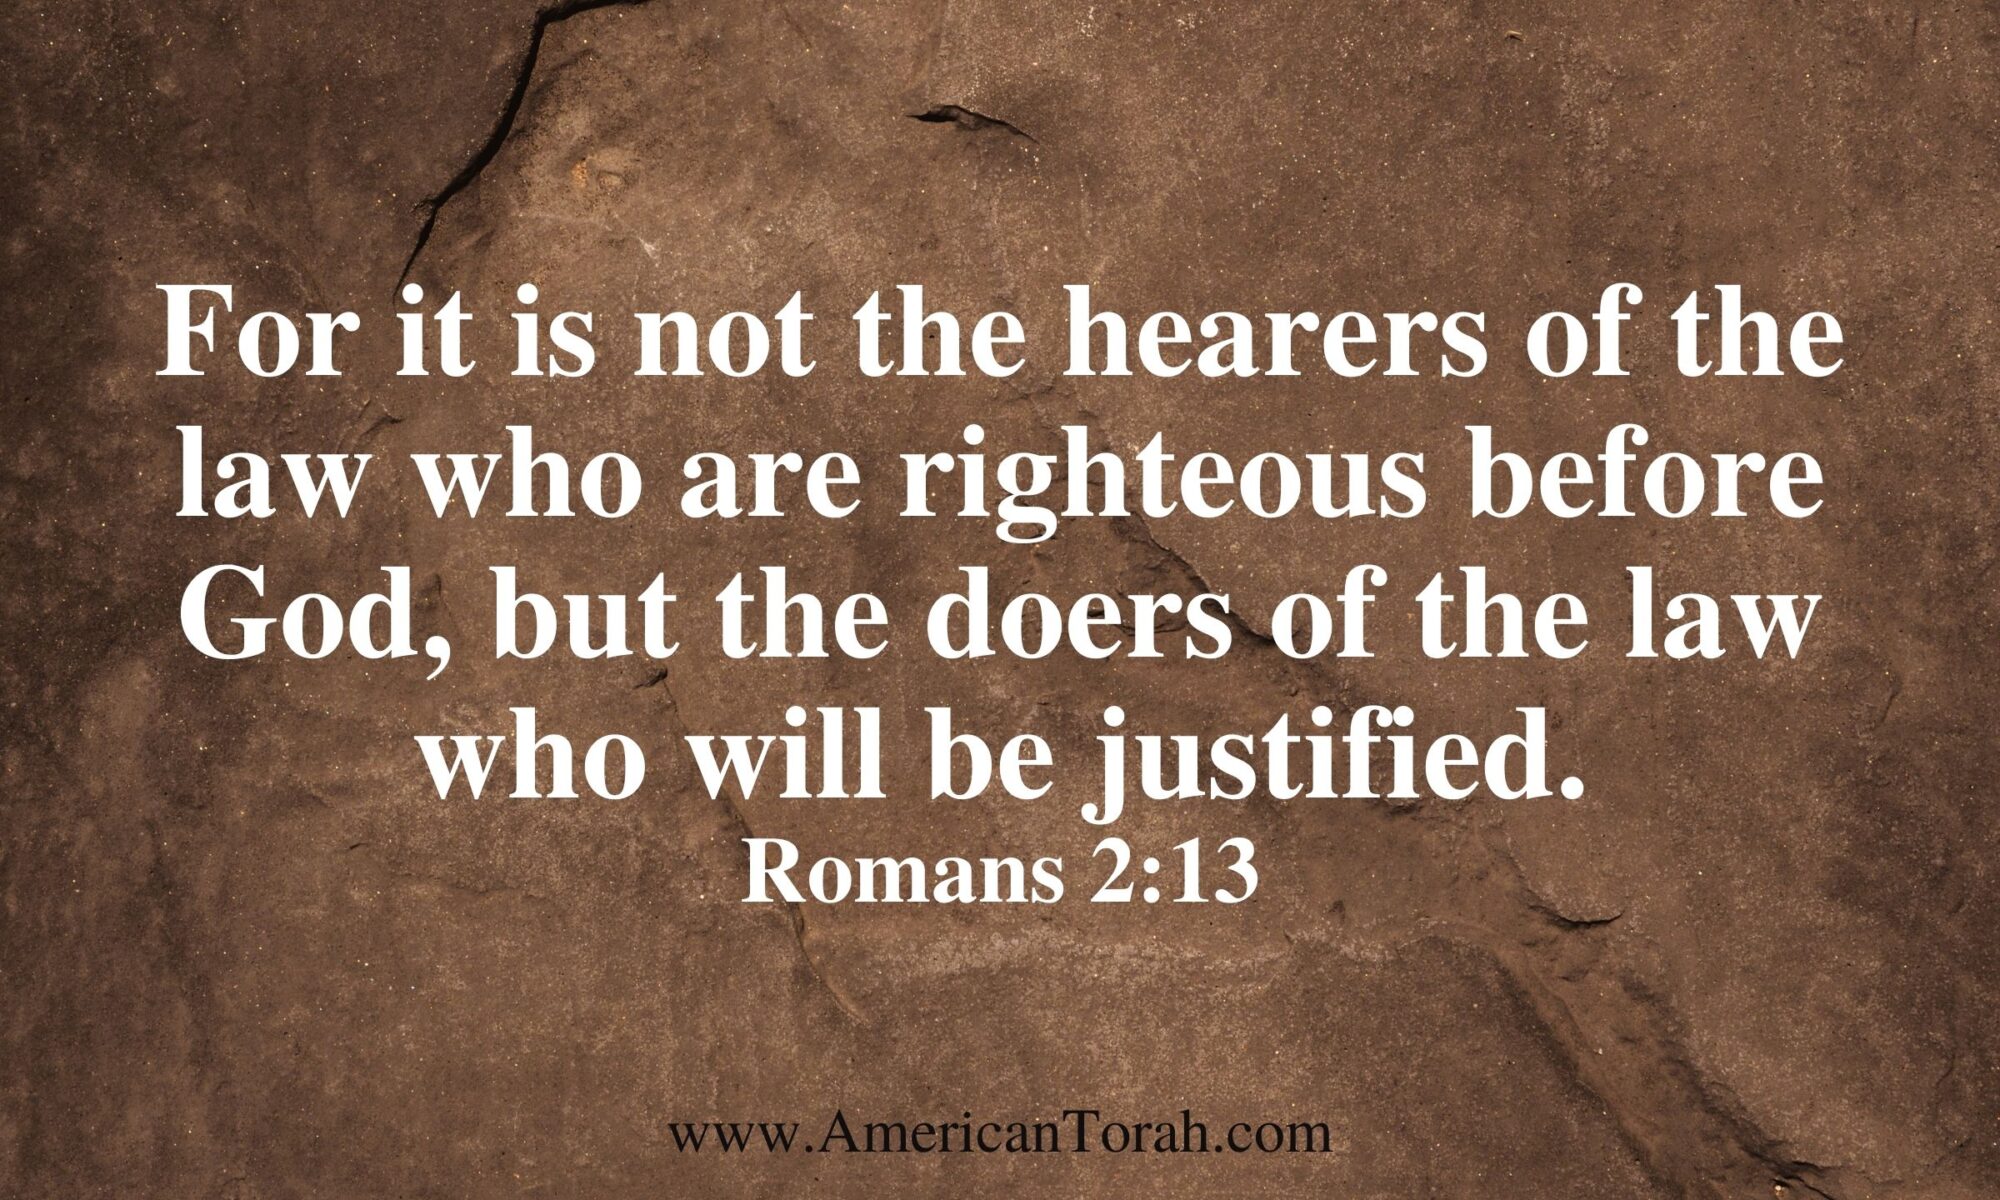 For it is not the hearers of the law who are righteous before God, but the doers of the law who will be justified. Romans 2:13. A Torah study for Christians.